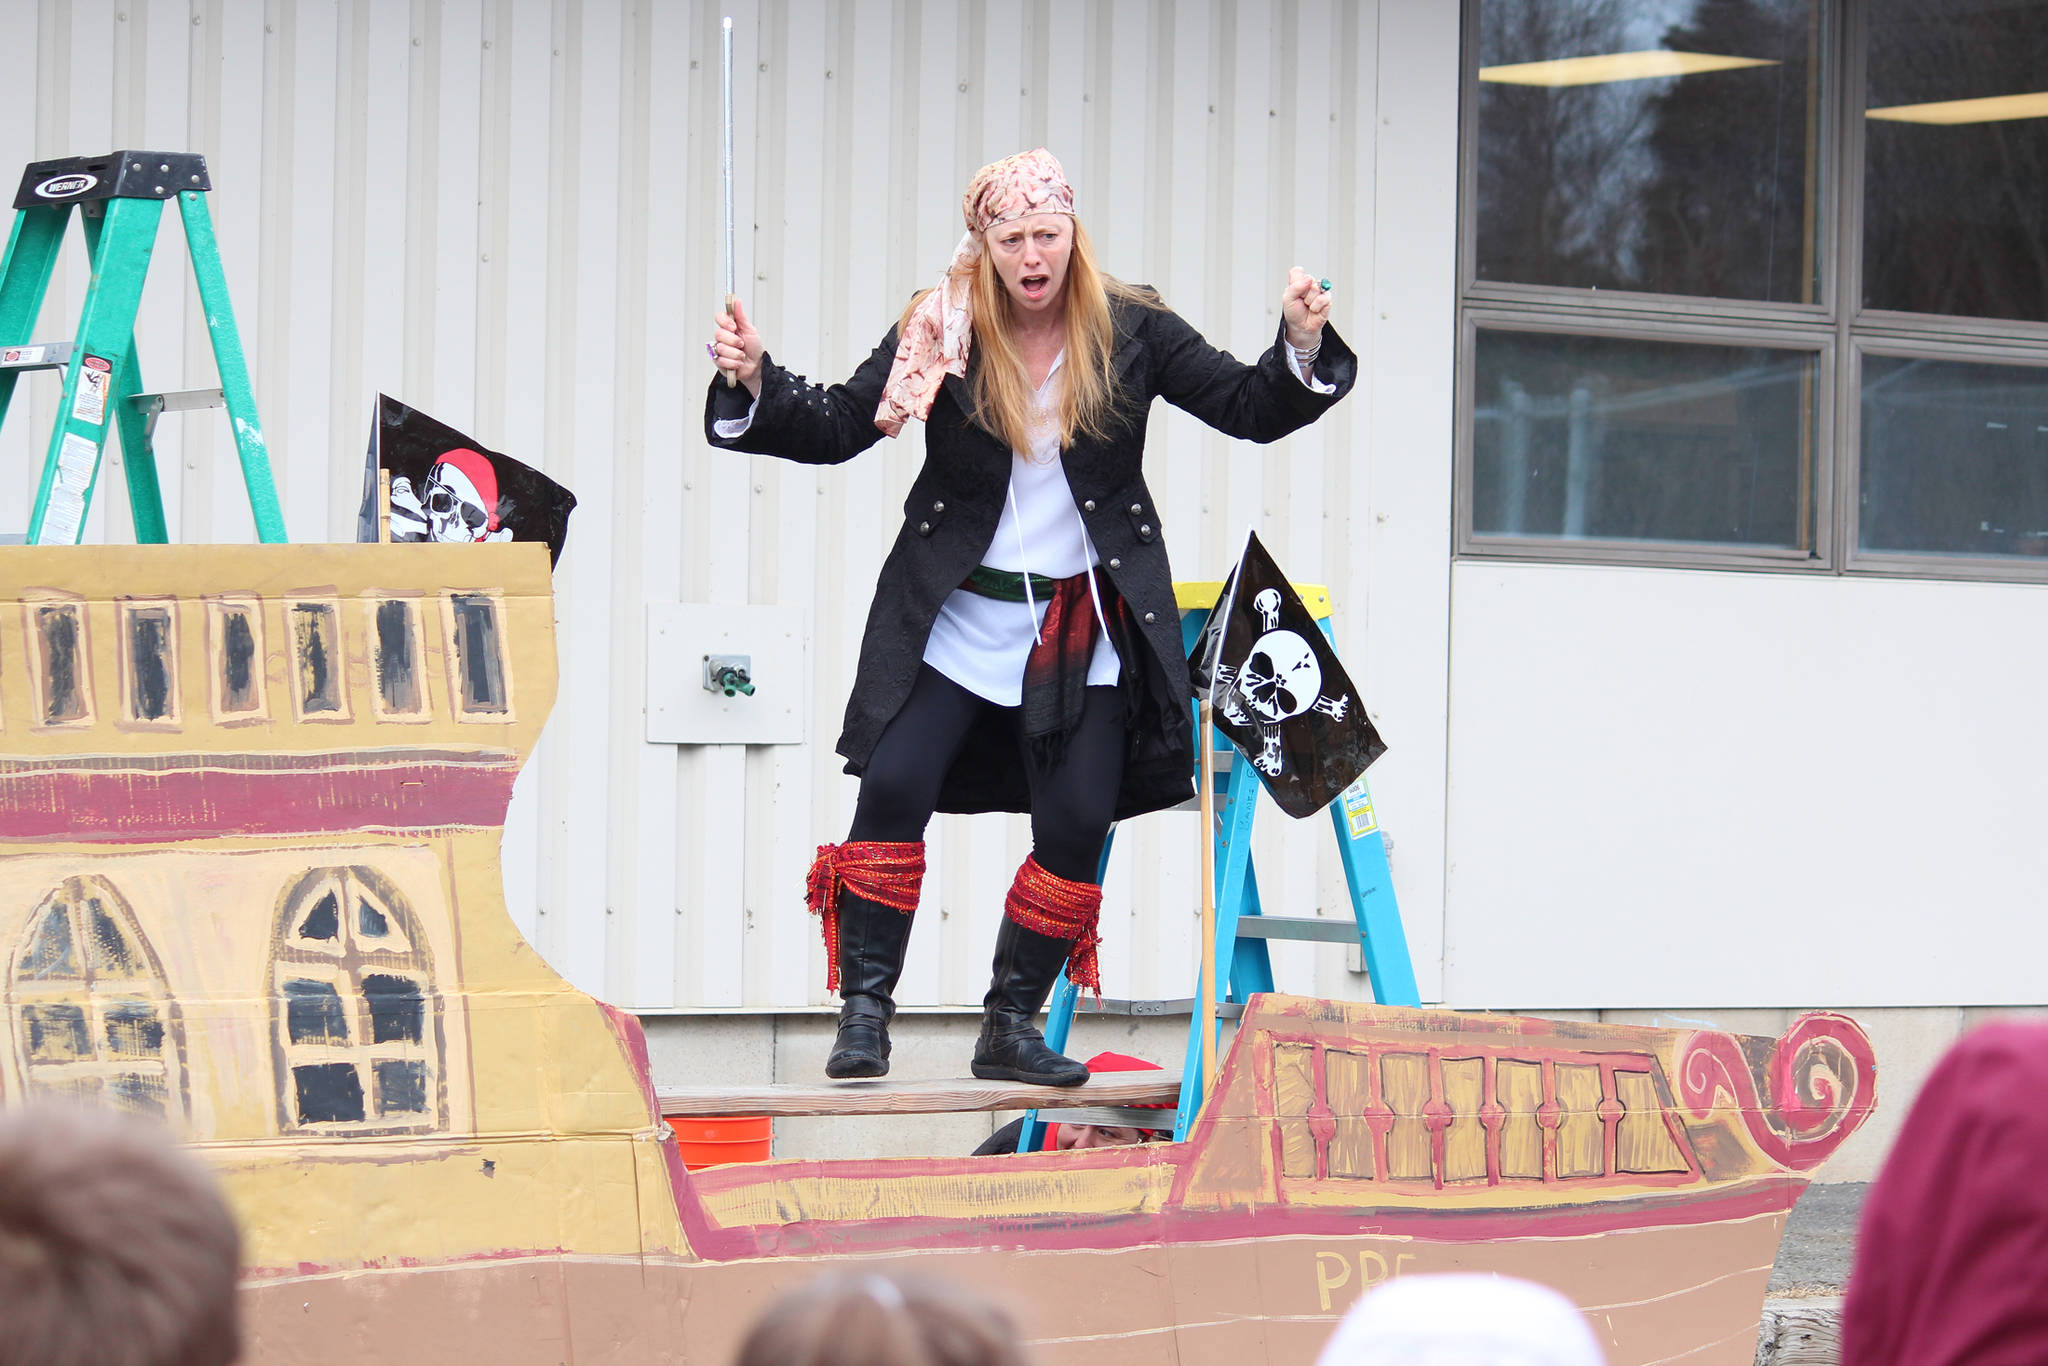 Robyn Walls prepares to “walk the plank” of a makeshift pirate ship during a Thursday, March 7, 2019 celebration of the read-a-thon Paul Banks Elementary students did, at the school in Homer, Alaska. Students read roughly 196,000 minutes, surpassing their goal. (Photo by Megan Pacer/Homer News)